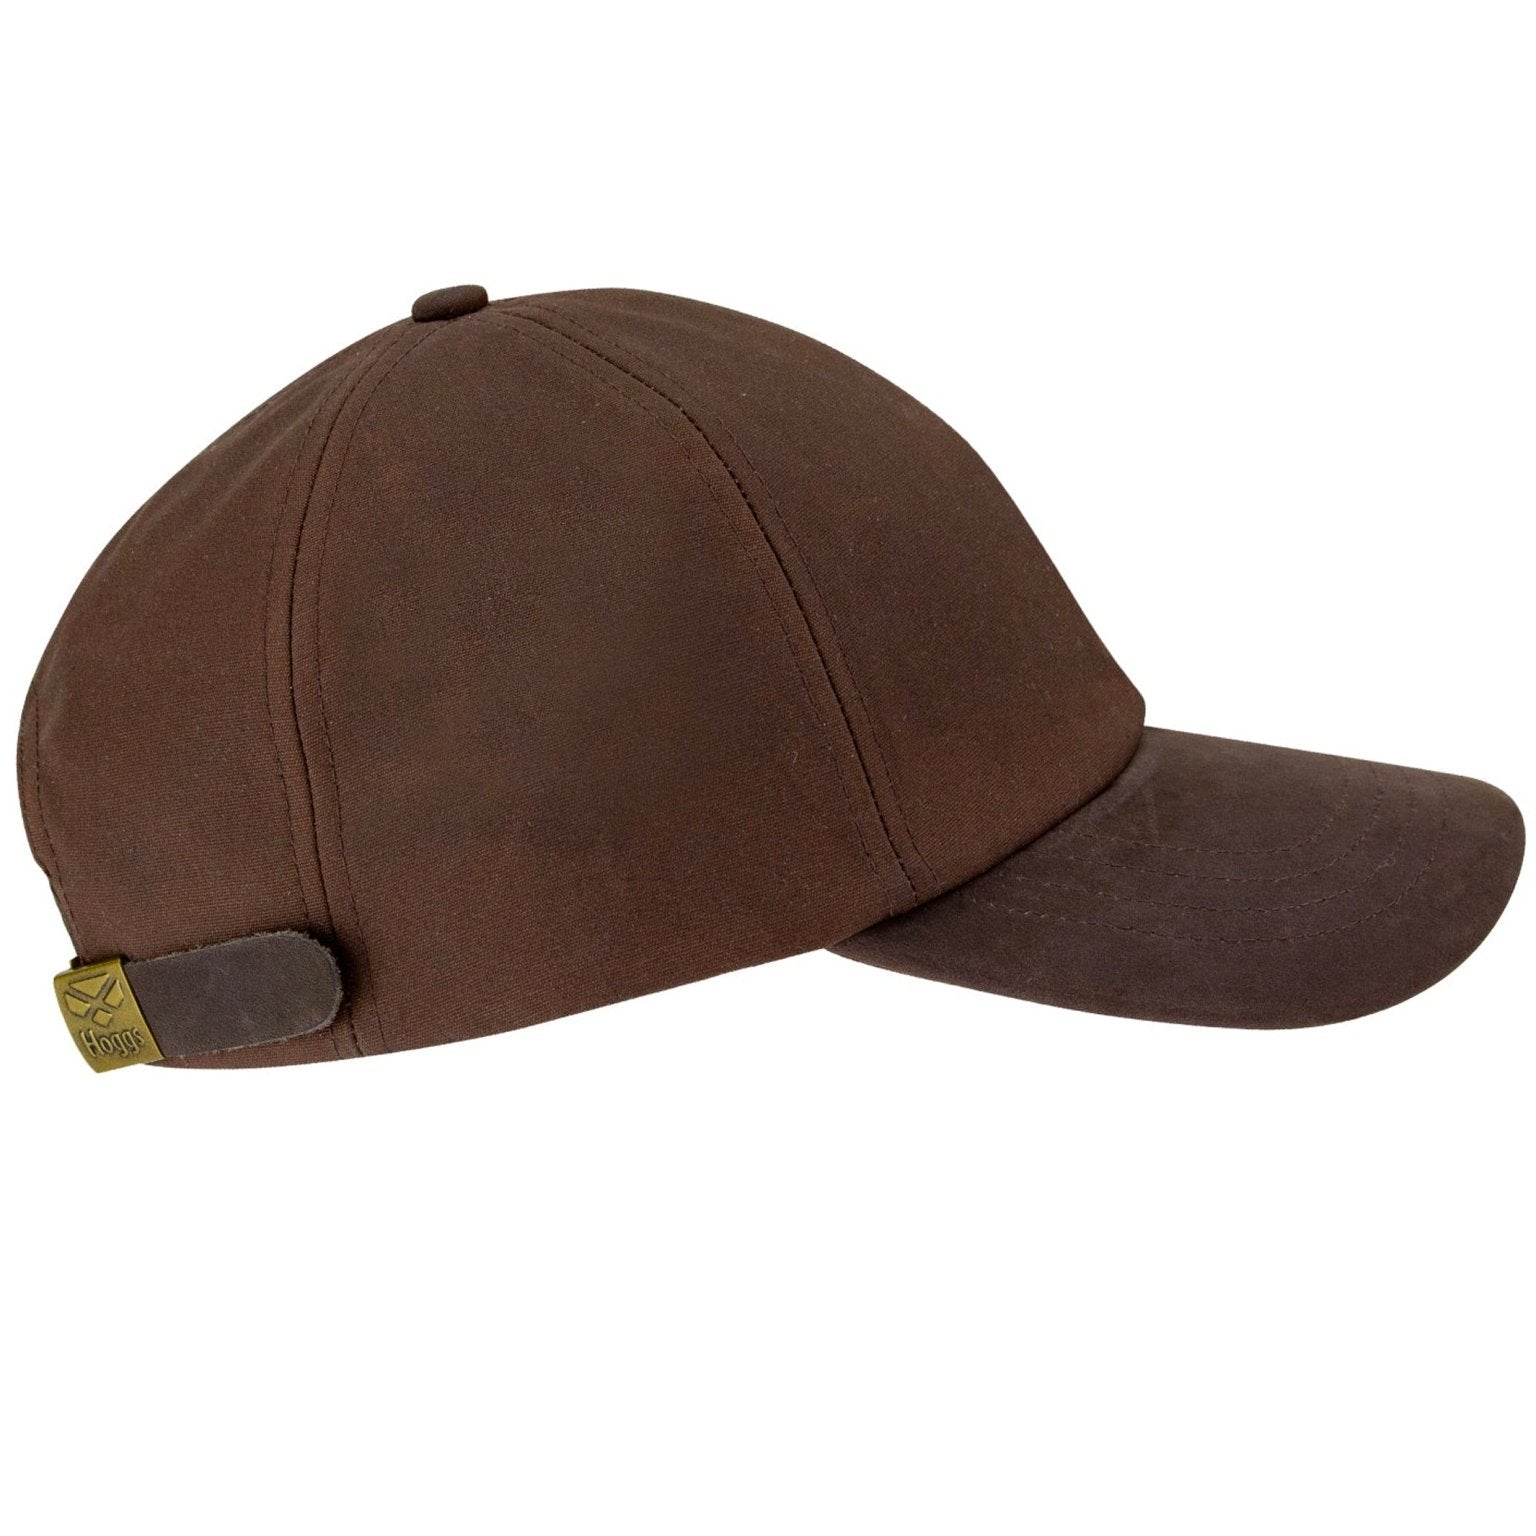 4elementsclothingHoggs of FifeHoggs of Fife - Waxed Water resistant Baseball CapHatsBBCP/BR/1